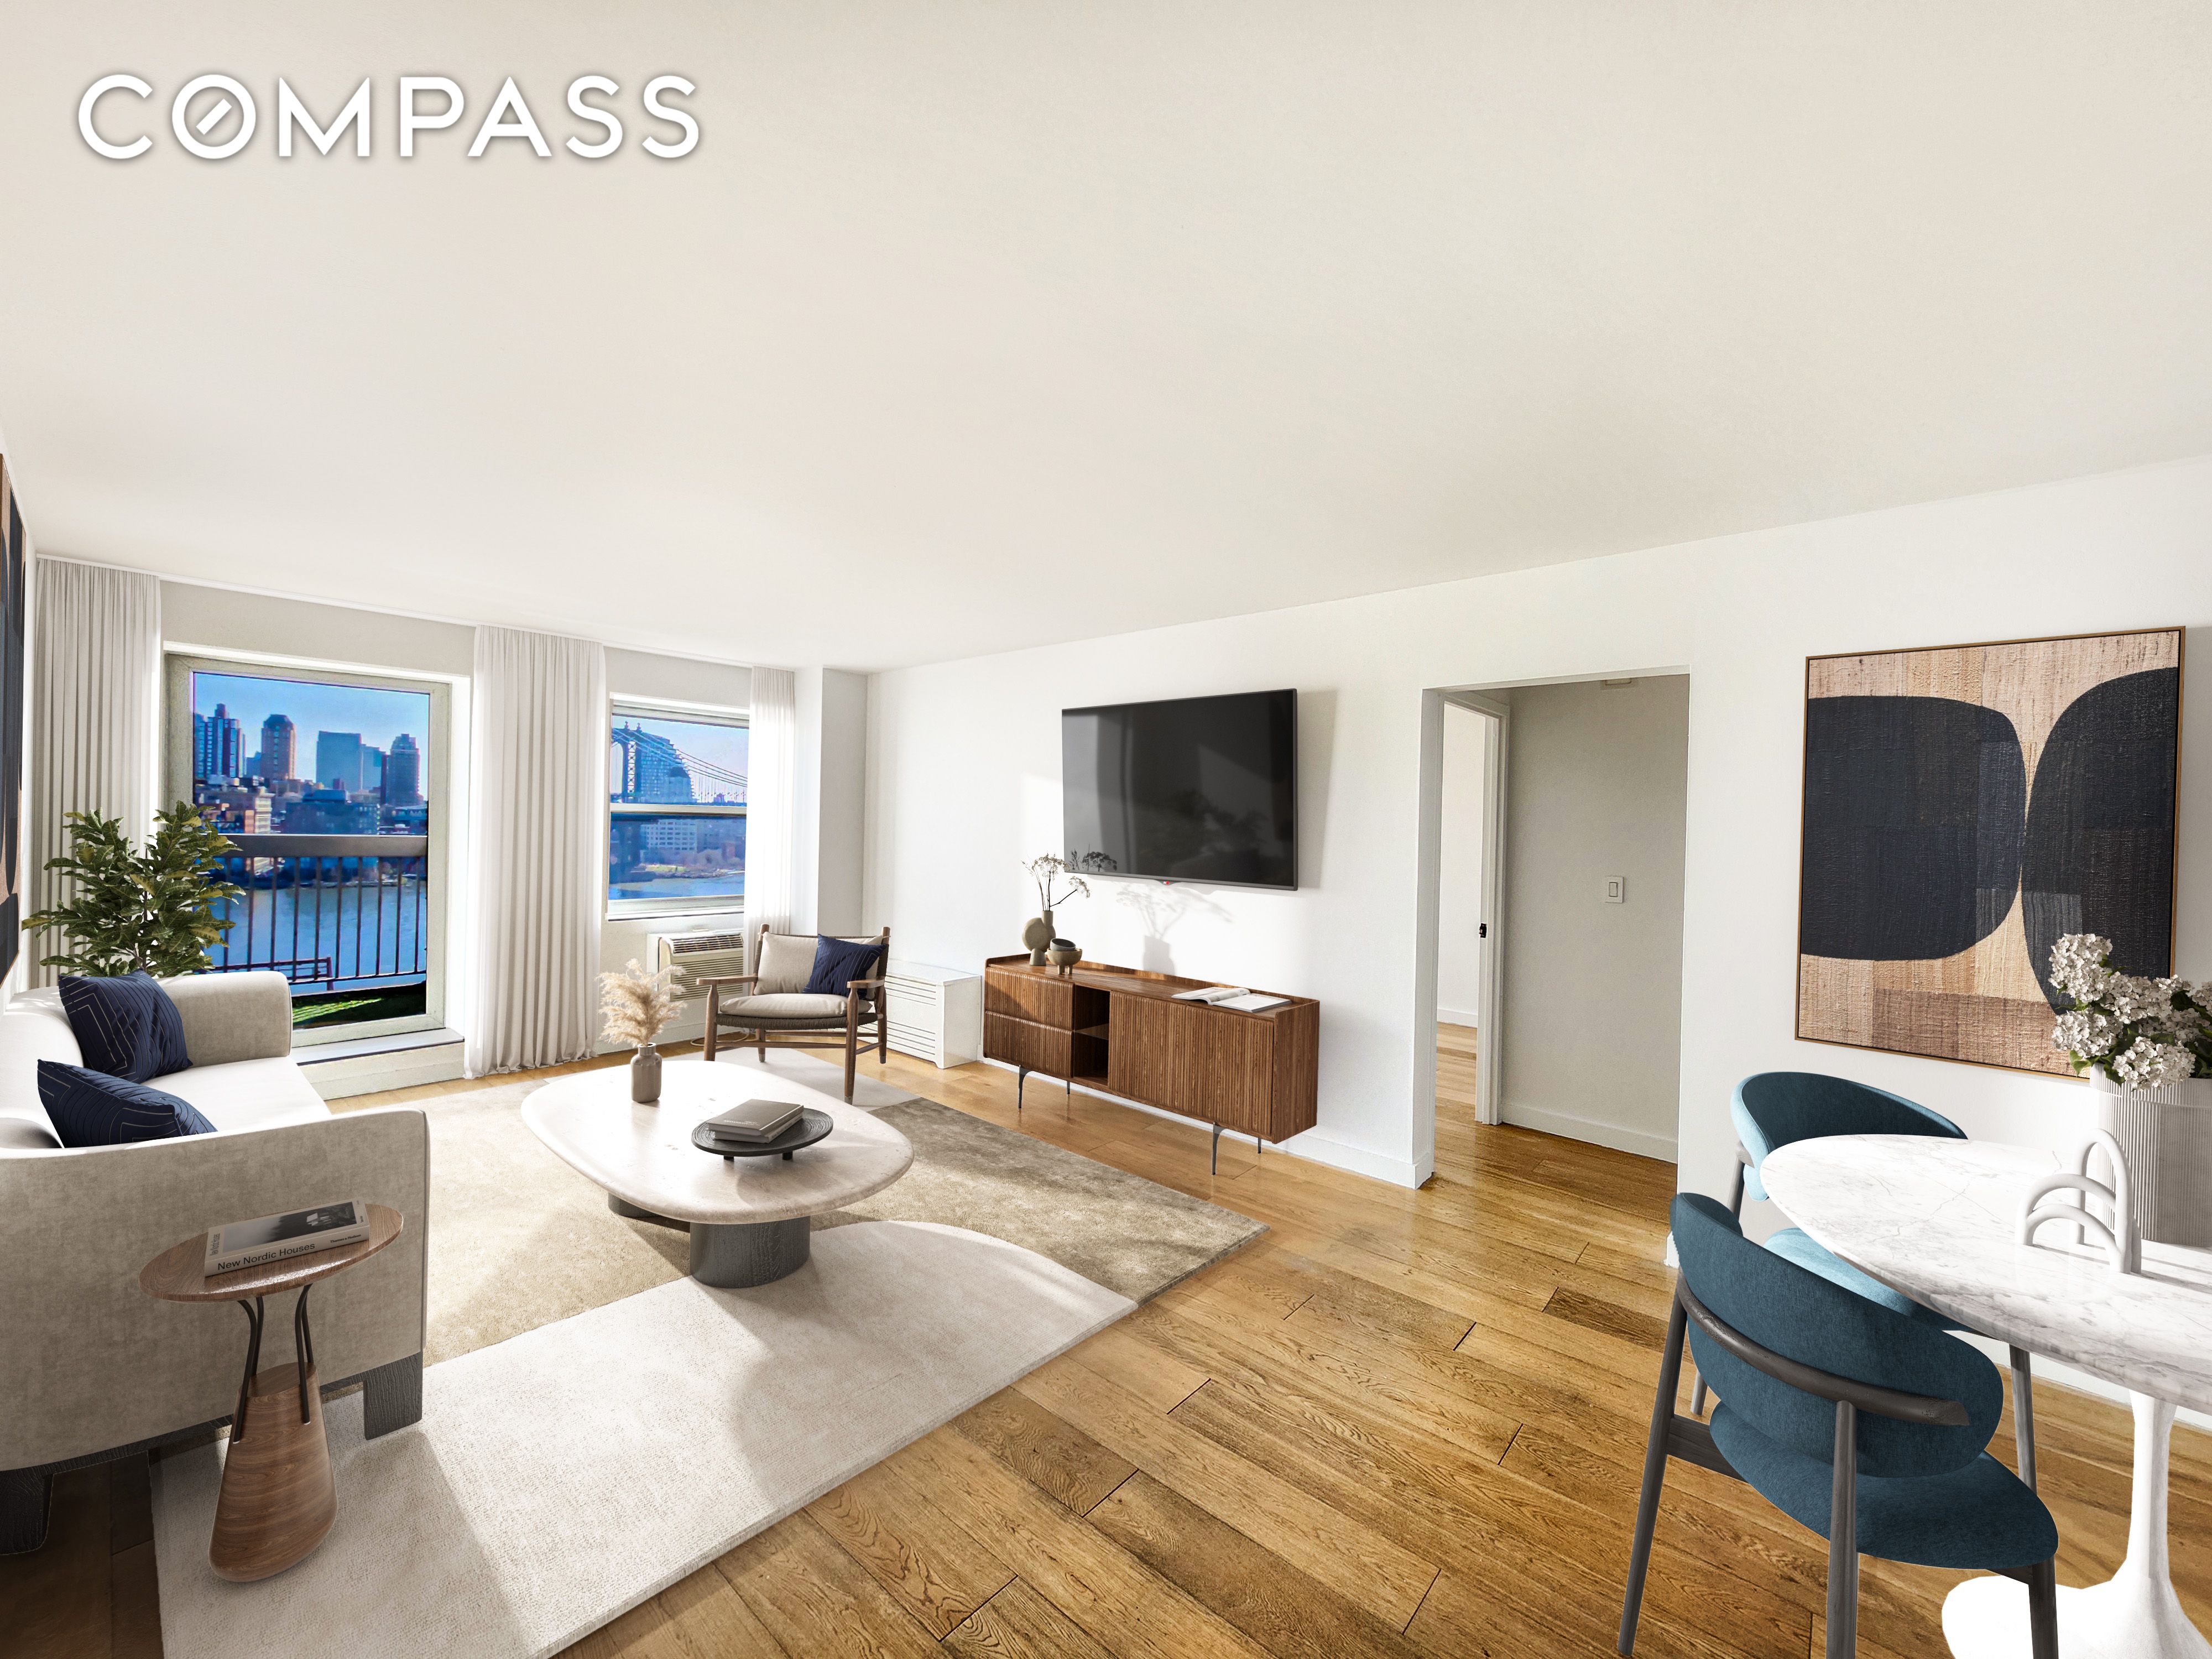 275 South Street 15Uu, Lower East Side, Downtown, NYC - 3 Bedrooms  
2 Bathrooms  
6 Rooms - 